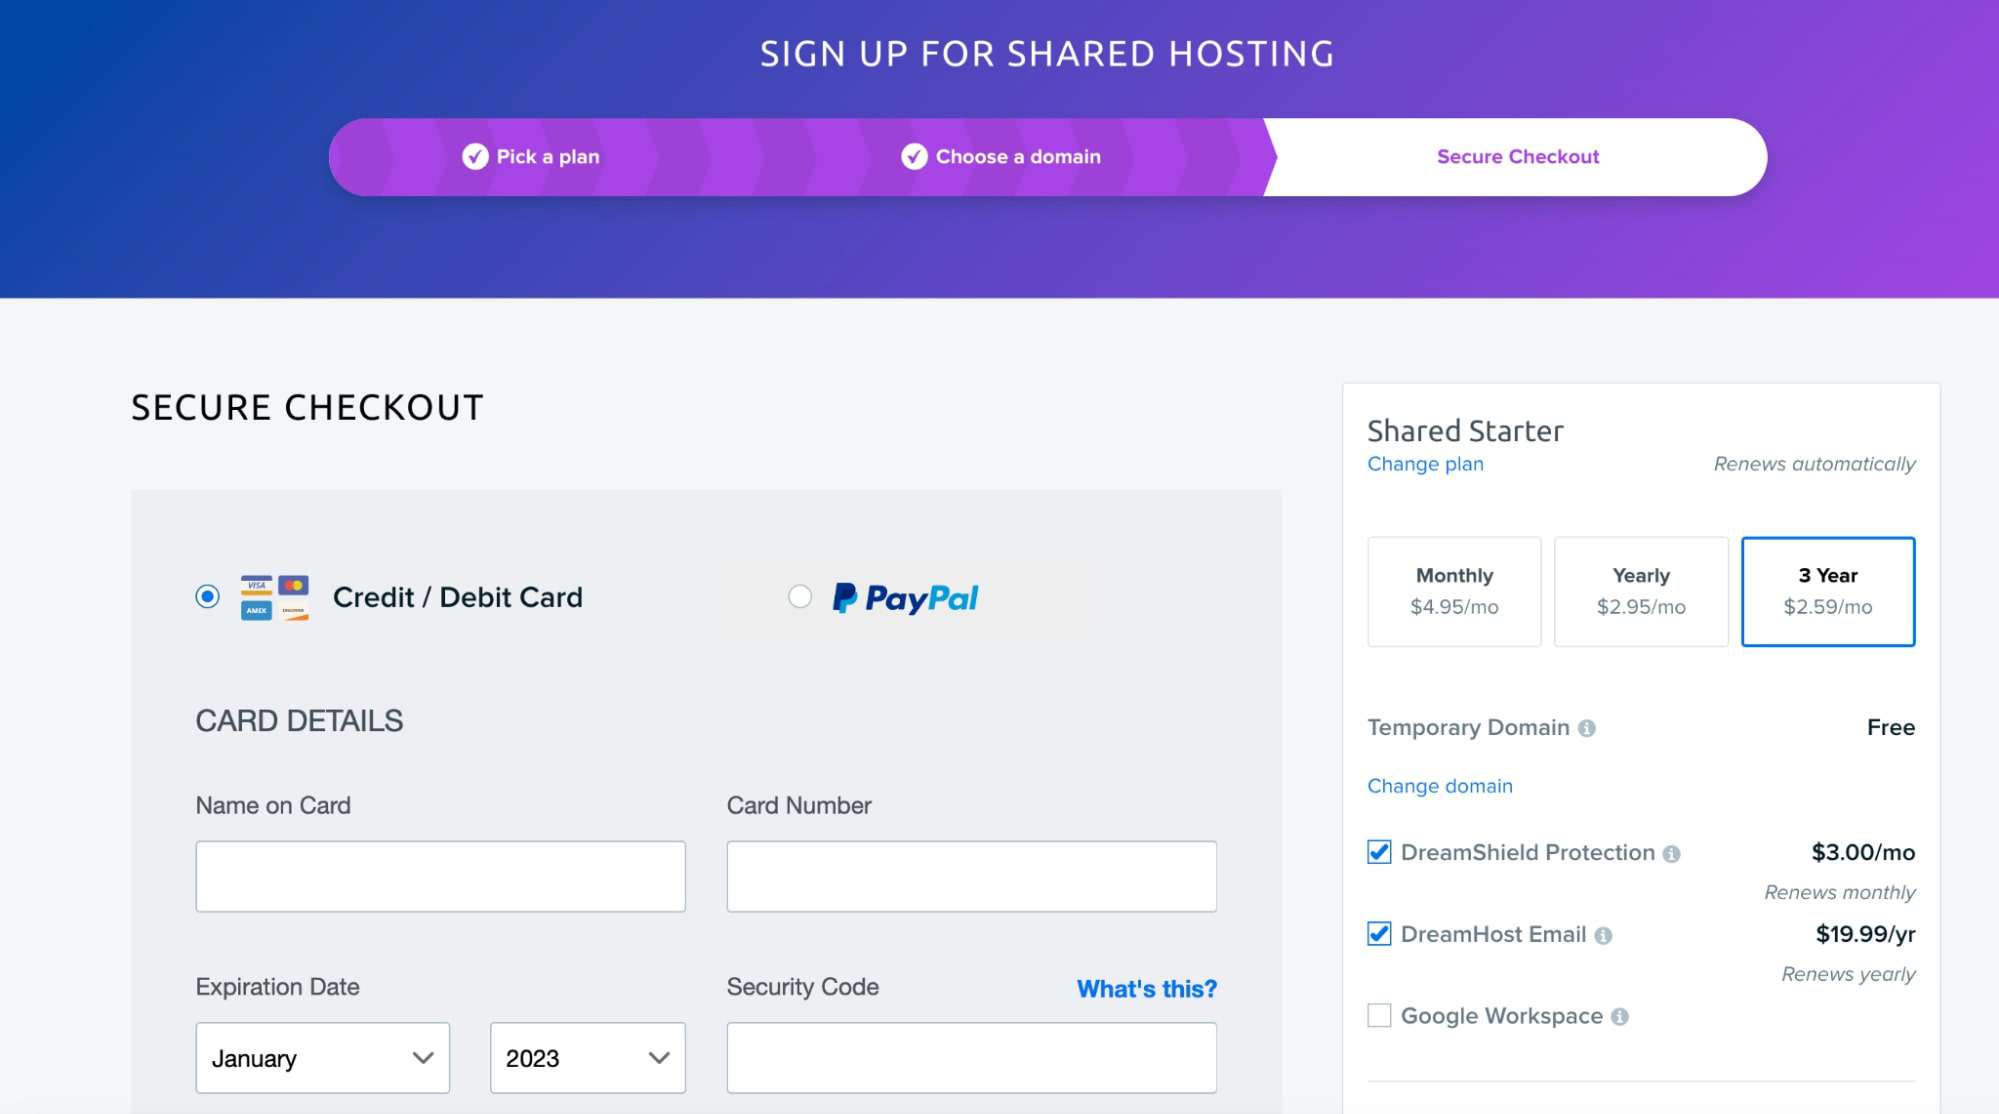 DreamHost accepts any major credit card or PayPal when you sign up.